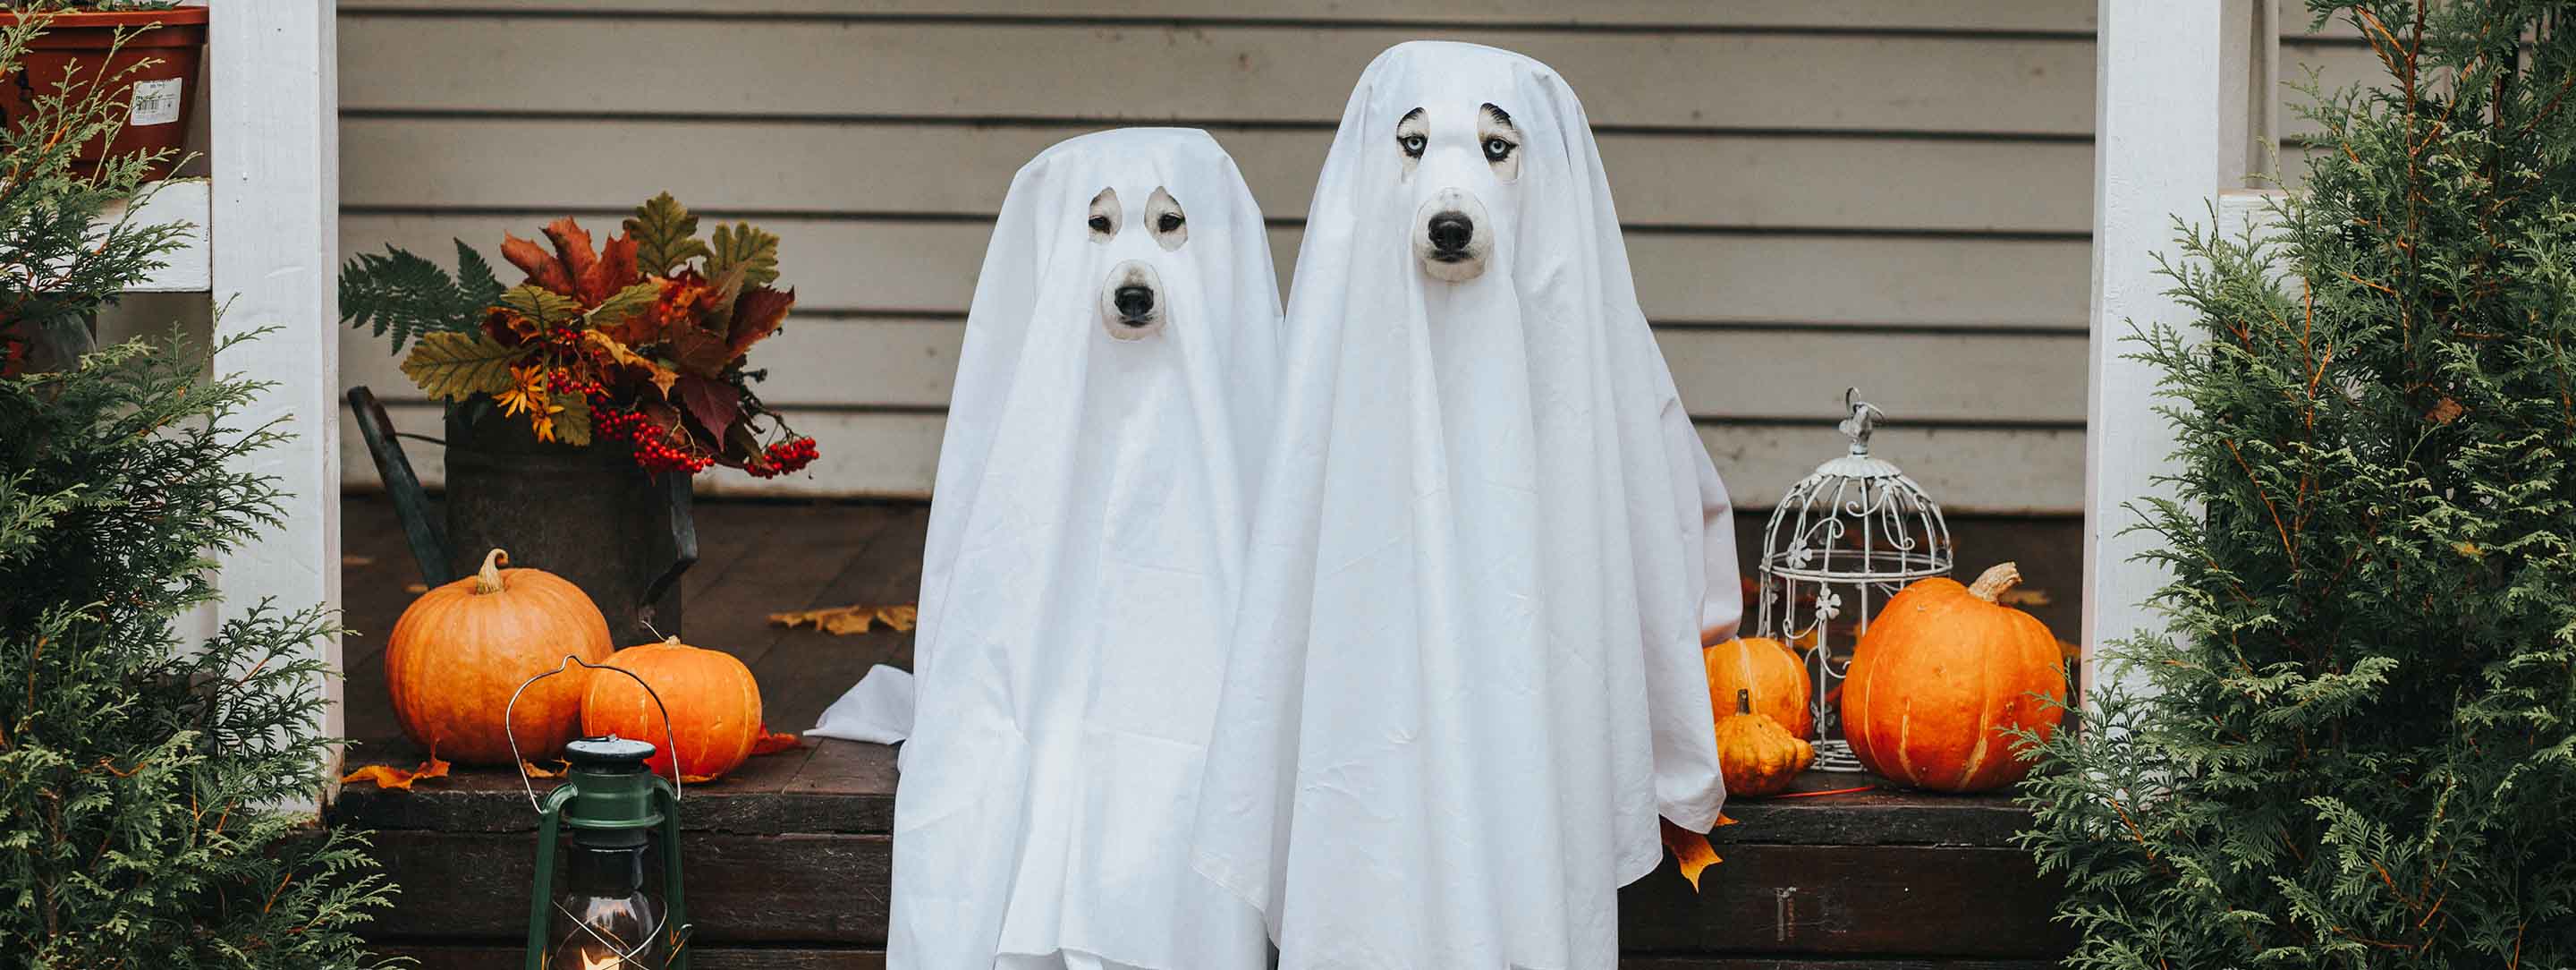 dogs dressed in ghost costume for Halloween